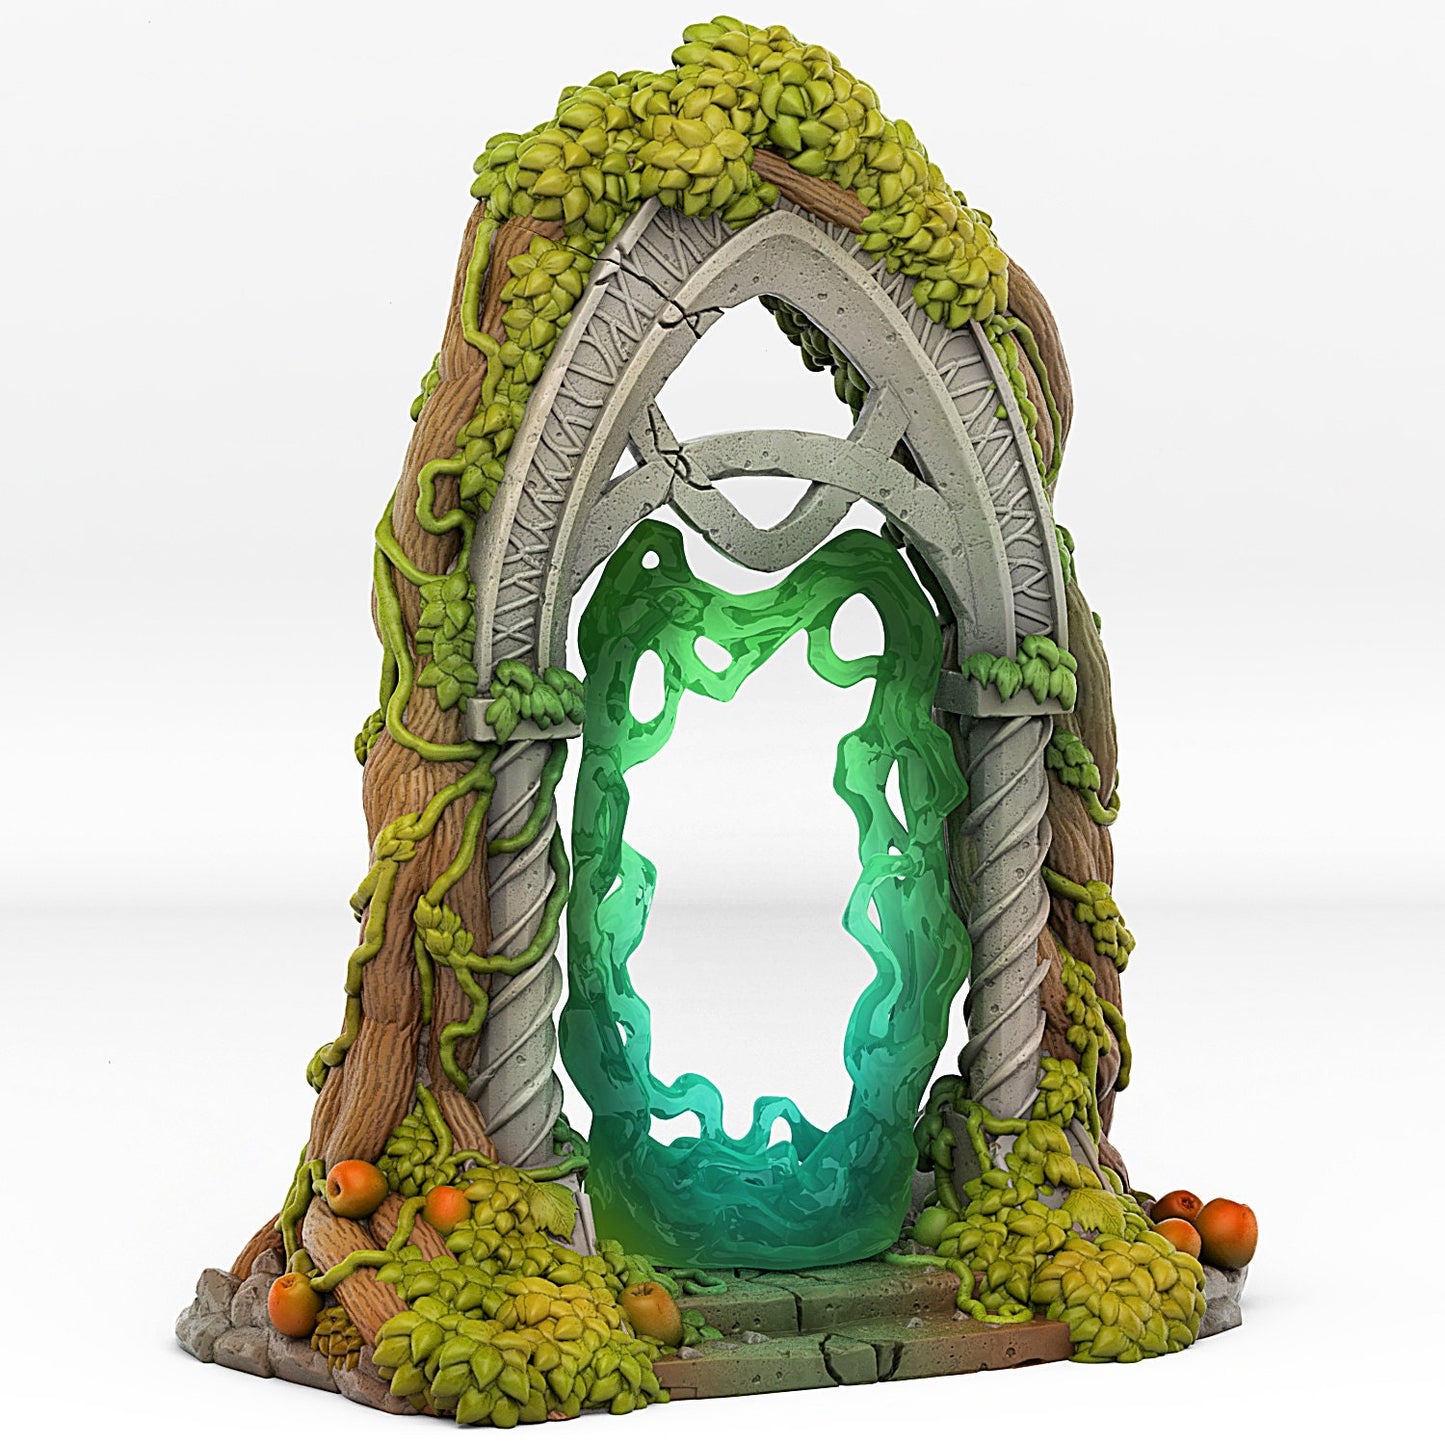 Elf Portal | Scenery and terrain | 3D Printed Resin Miniature | Tabletop Role Playing | AoS | D&D | 40K | Pathfinder